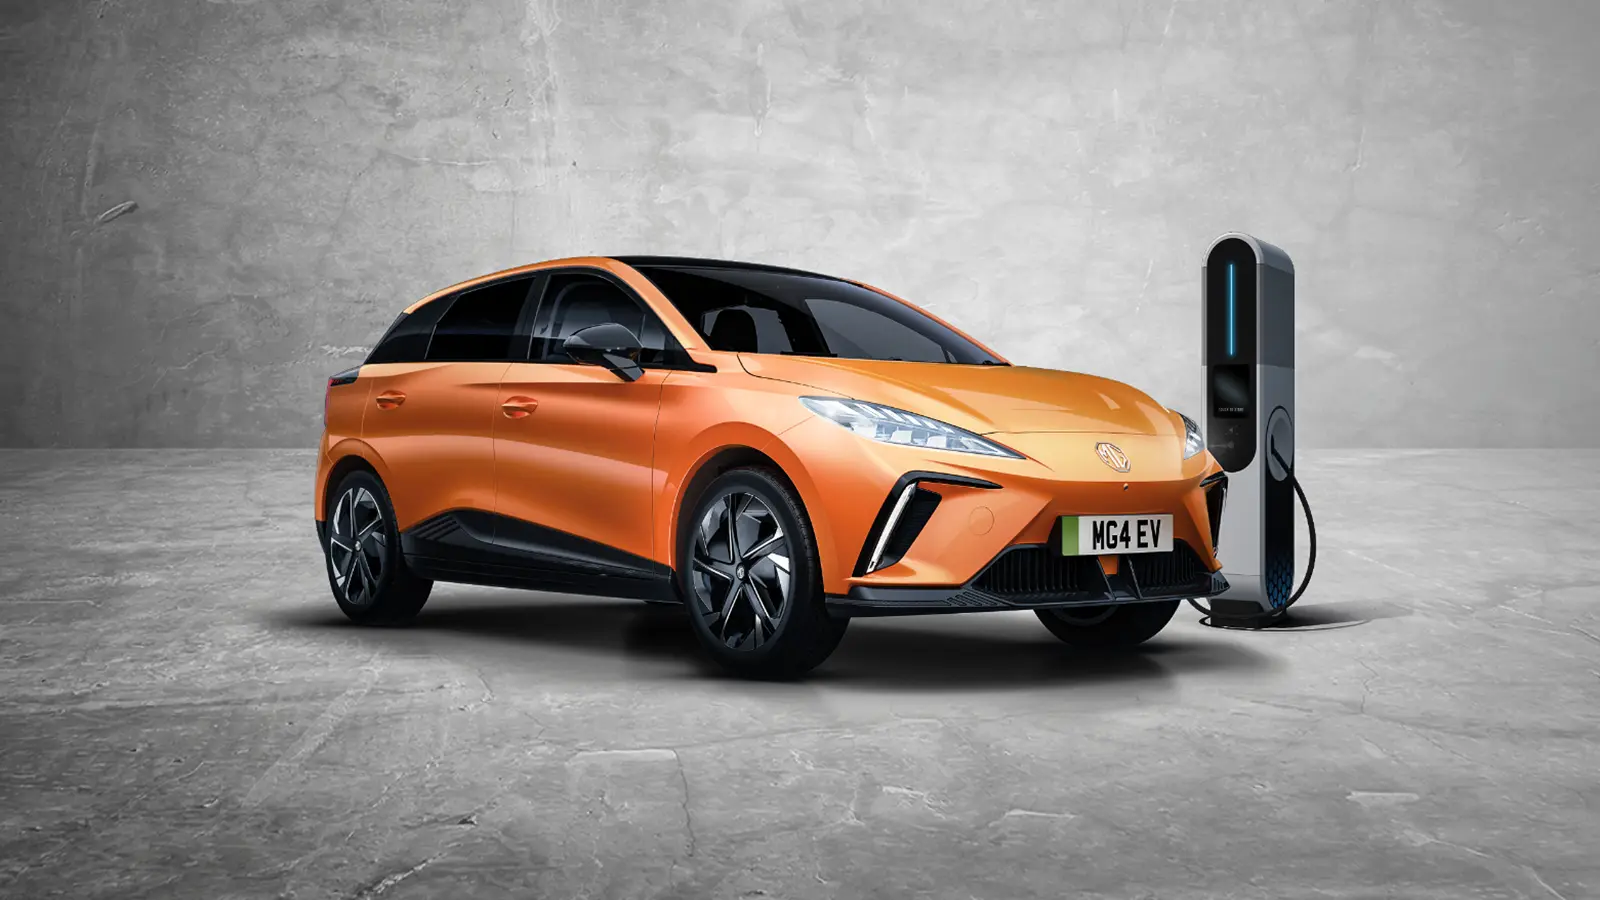 Launch campaign for the All-New MG4 EV